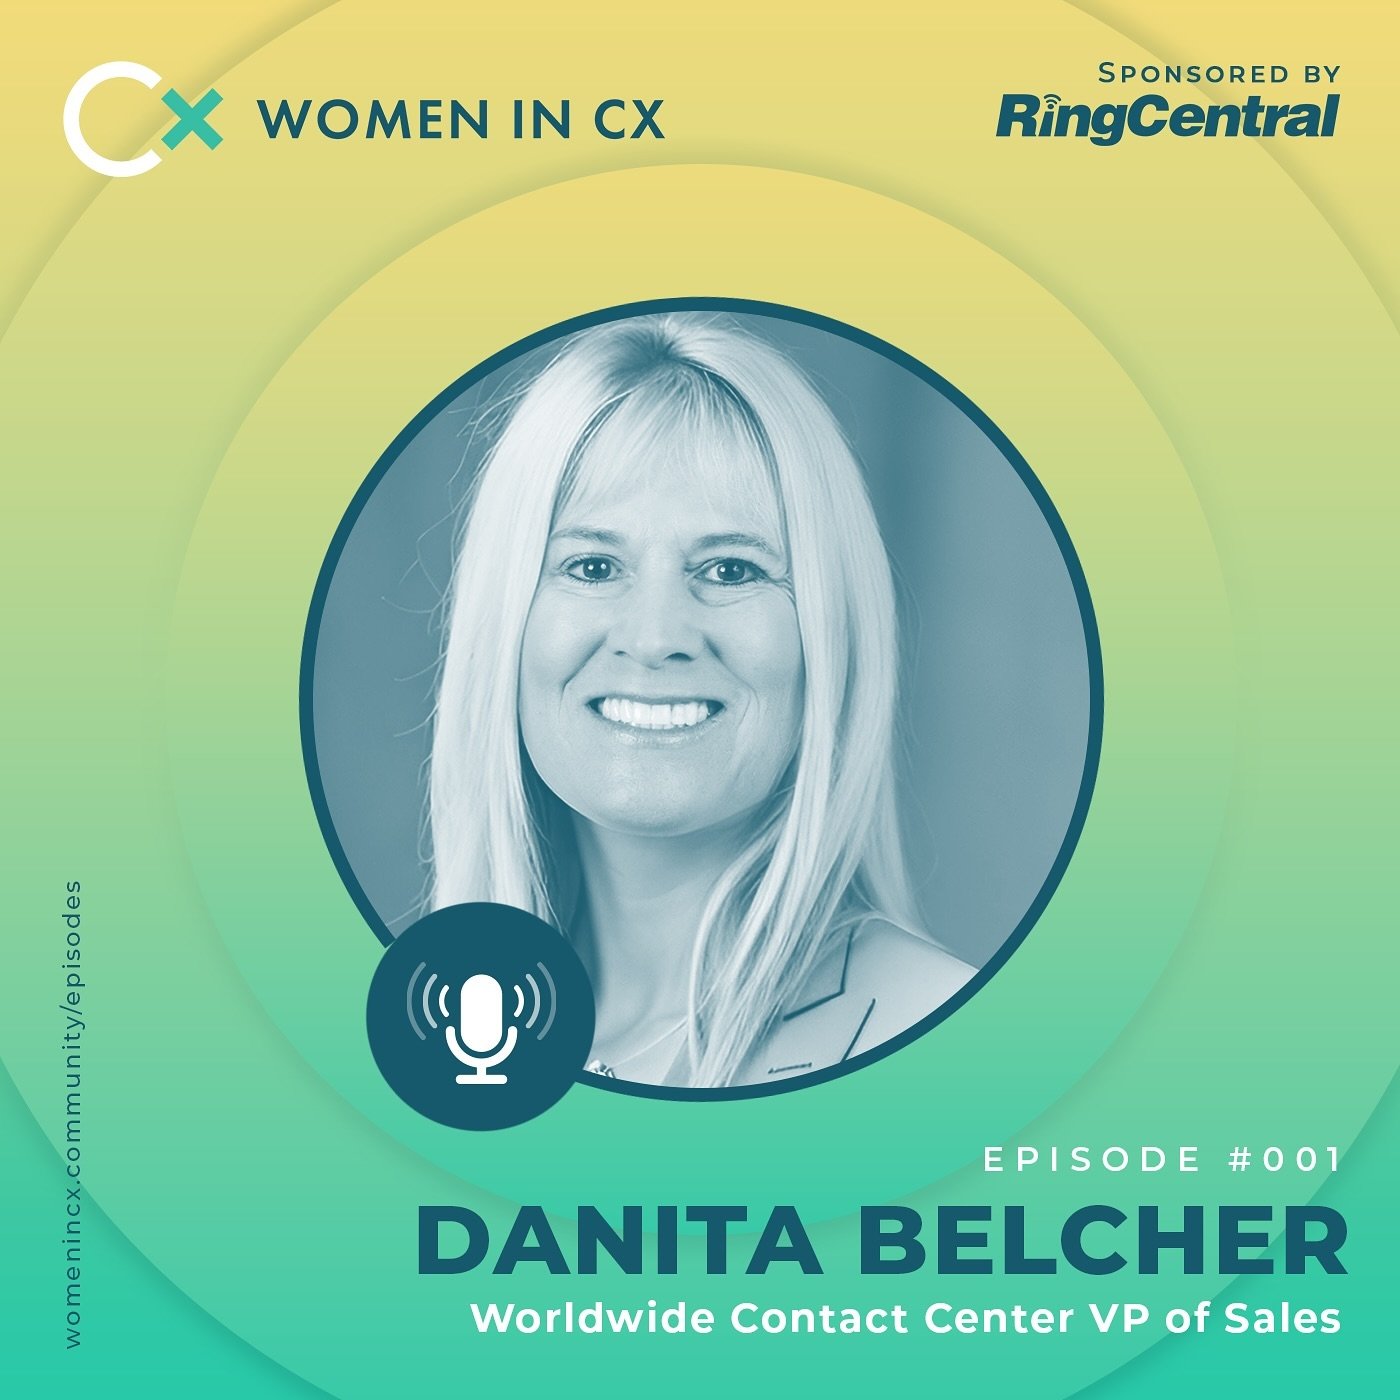 Would you rather?
&nbsp;
A.&nbsp;&nbsp;&nbsp;&nbsp;Clean the bathroom 🧽
B.&nbsp;&nbsp;&nbsp;&nbsp;Contact customer service 📞
&nbsp;
Joined by Danita Belcher, VP of Sales, Worldwide Contact Center at @ringcentral, in episode #001 of the &lsquo;WiCX 